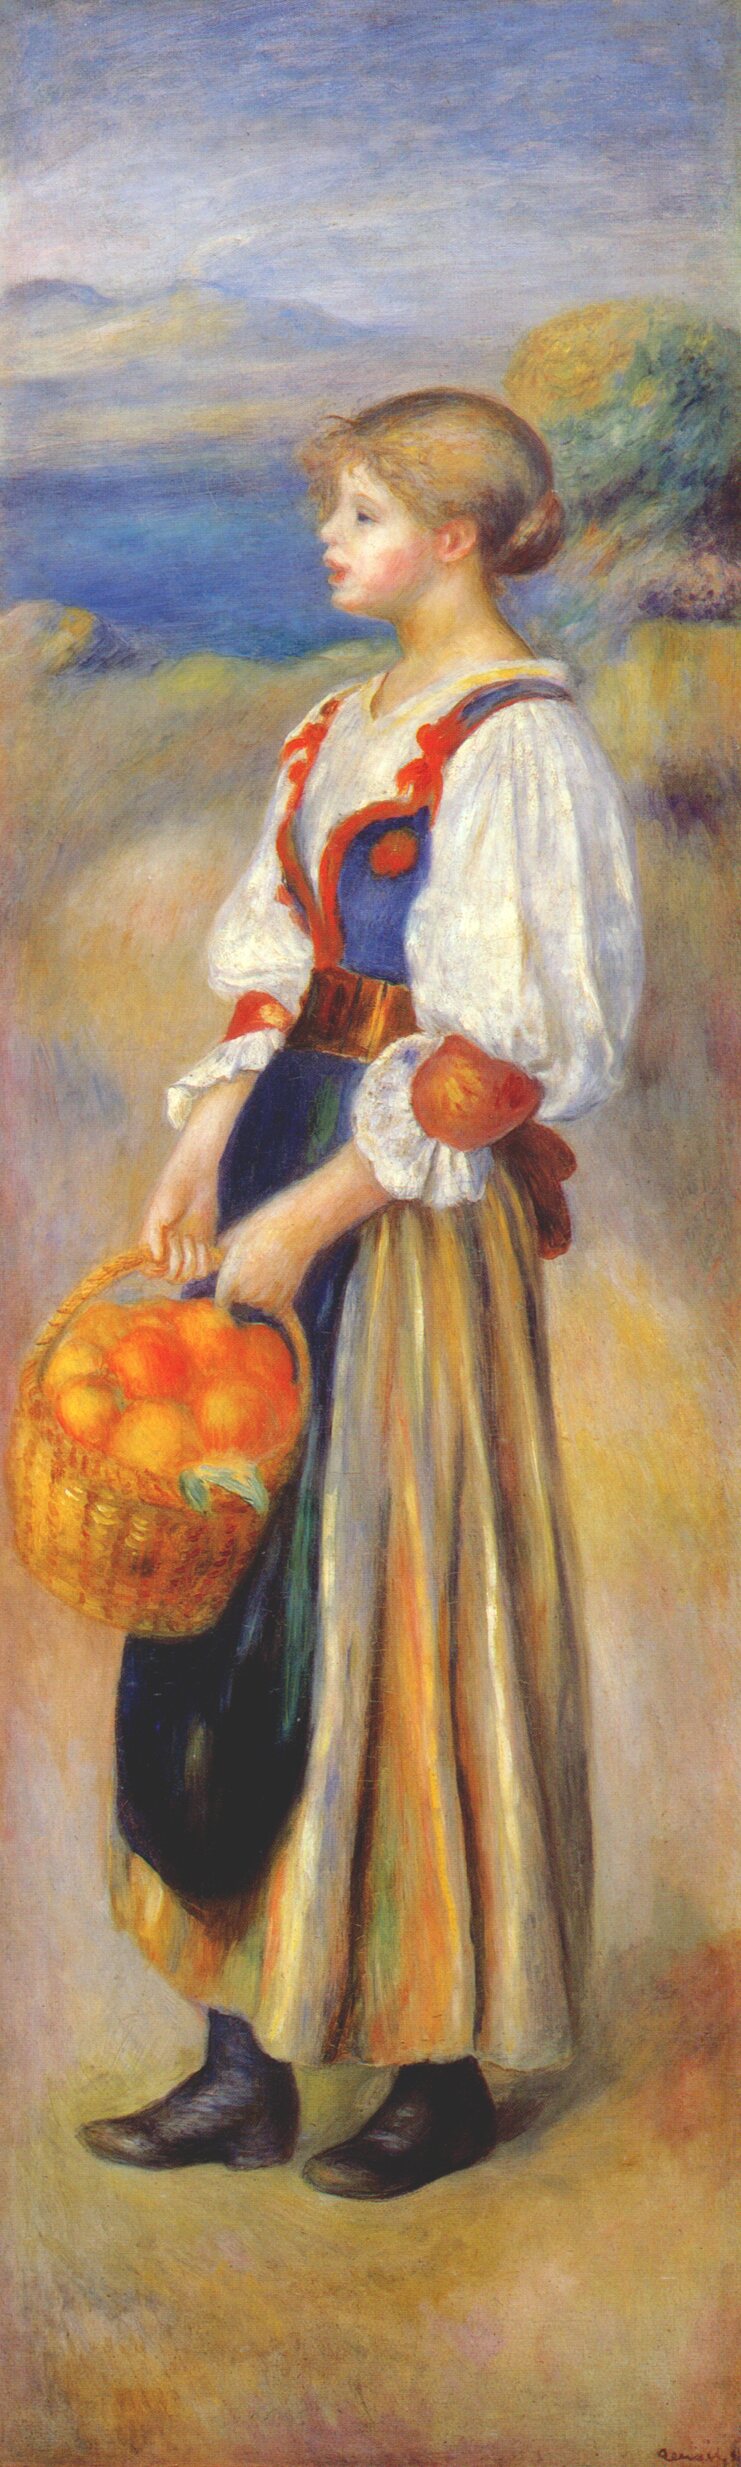 Girl with a basket of oranges - Pierre-Auguste Renoir painting on canvas